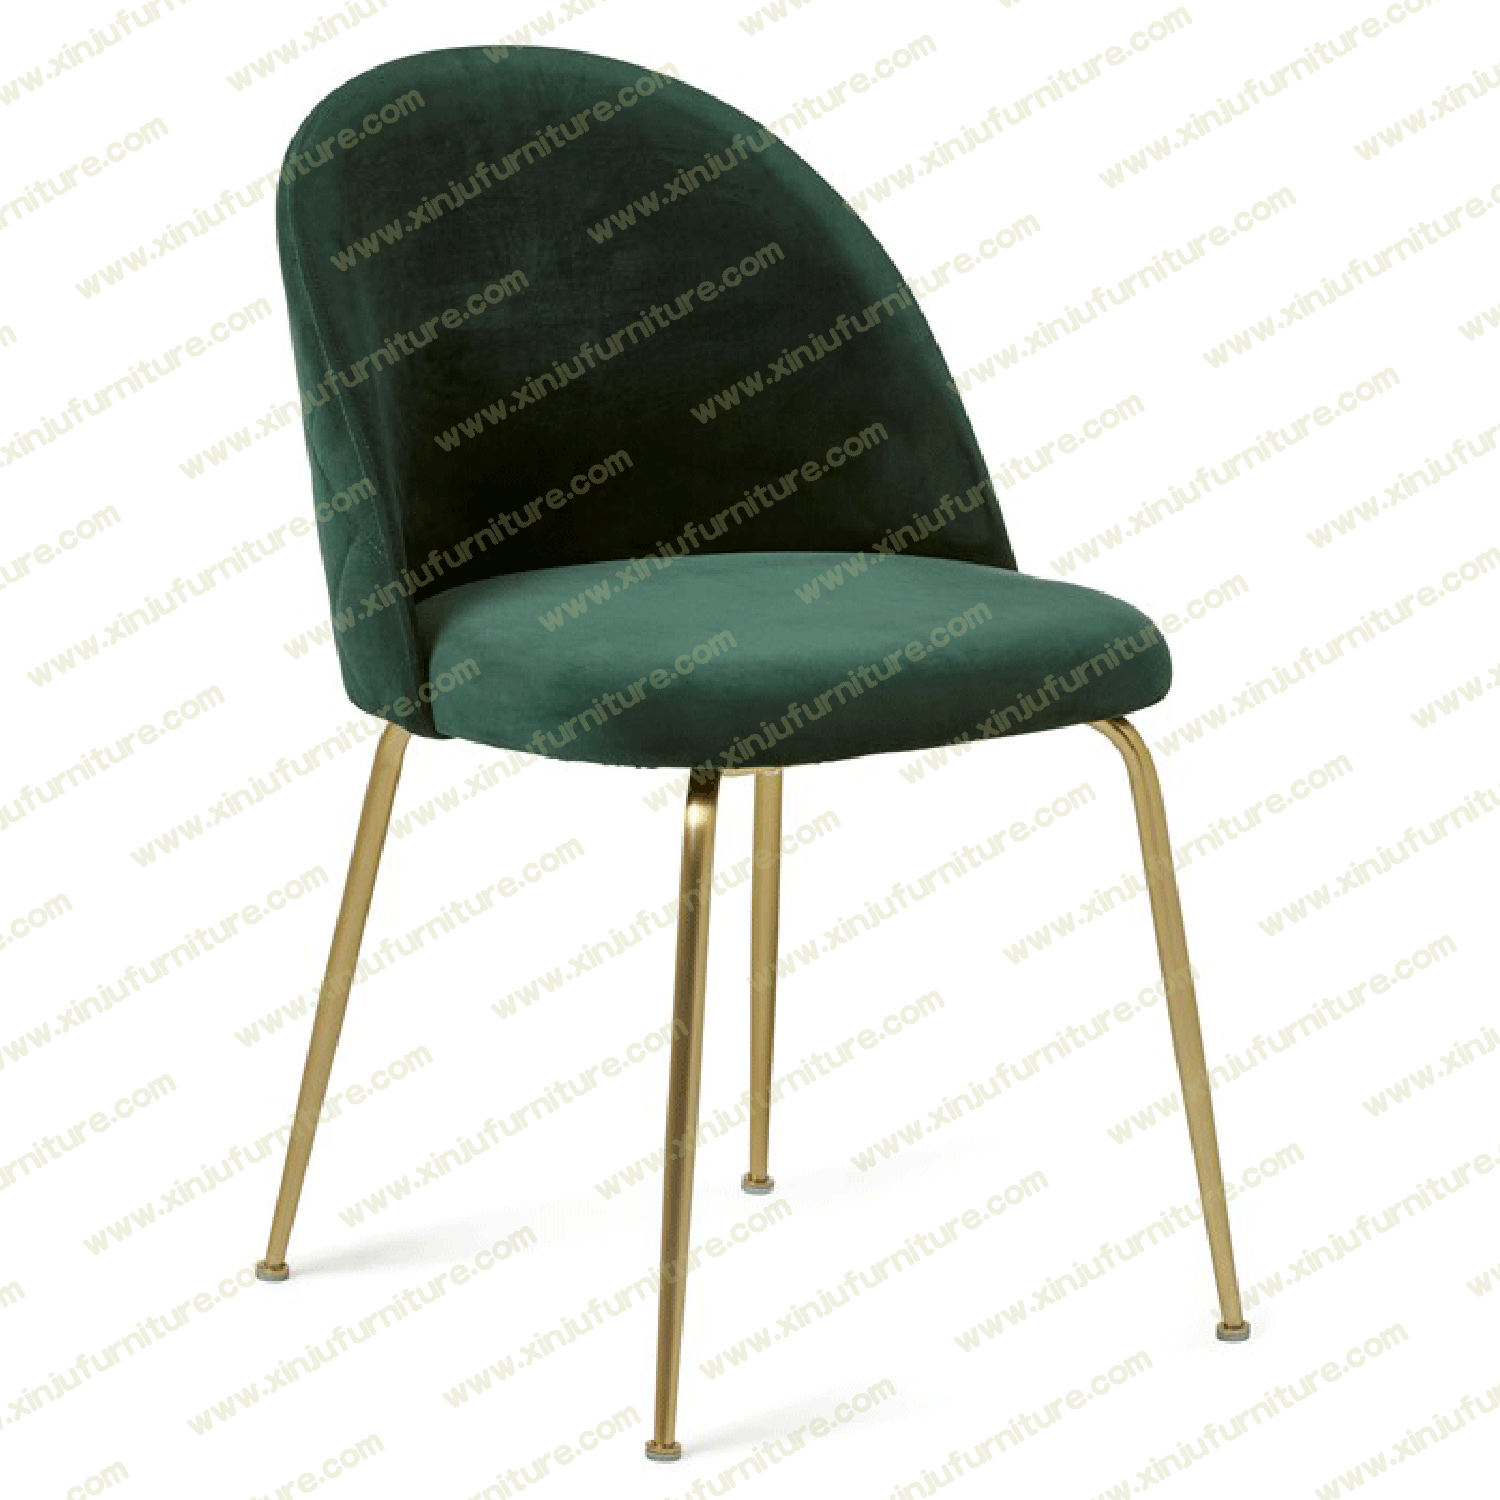 Tufted cute colorful dining chair dark green